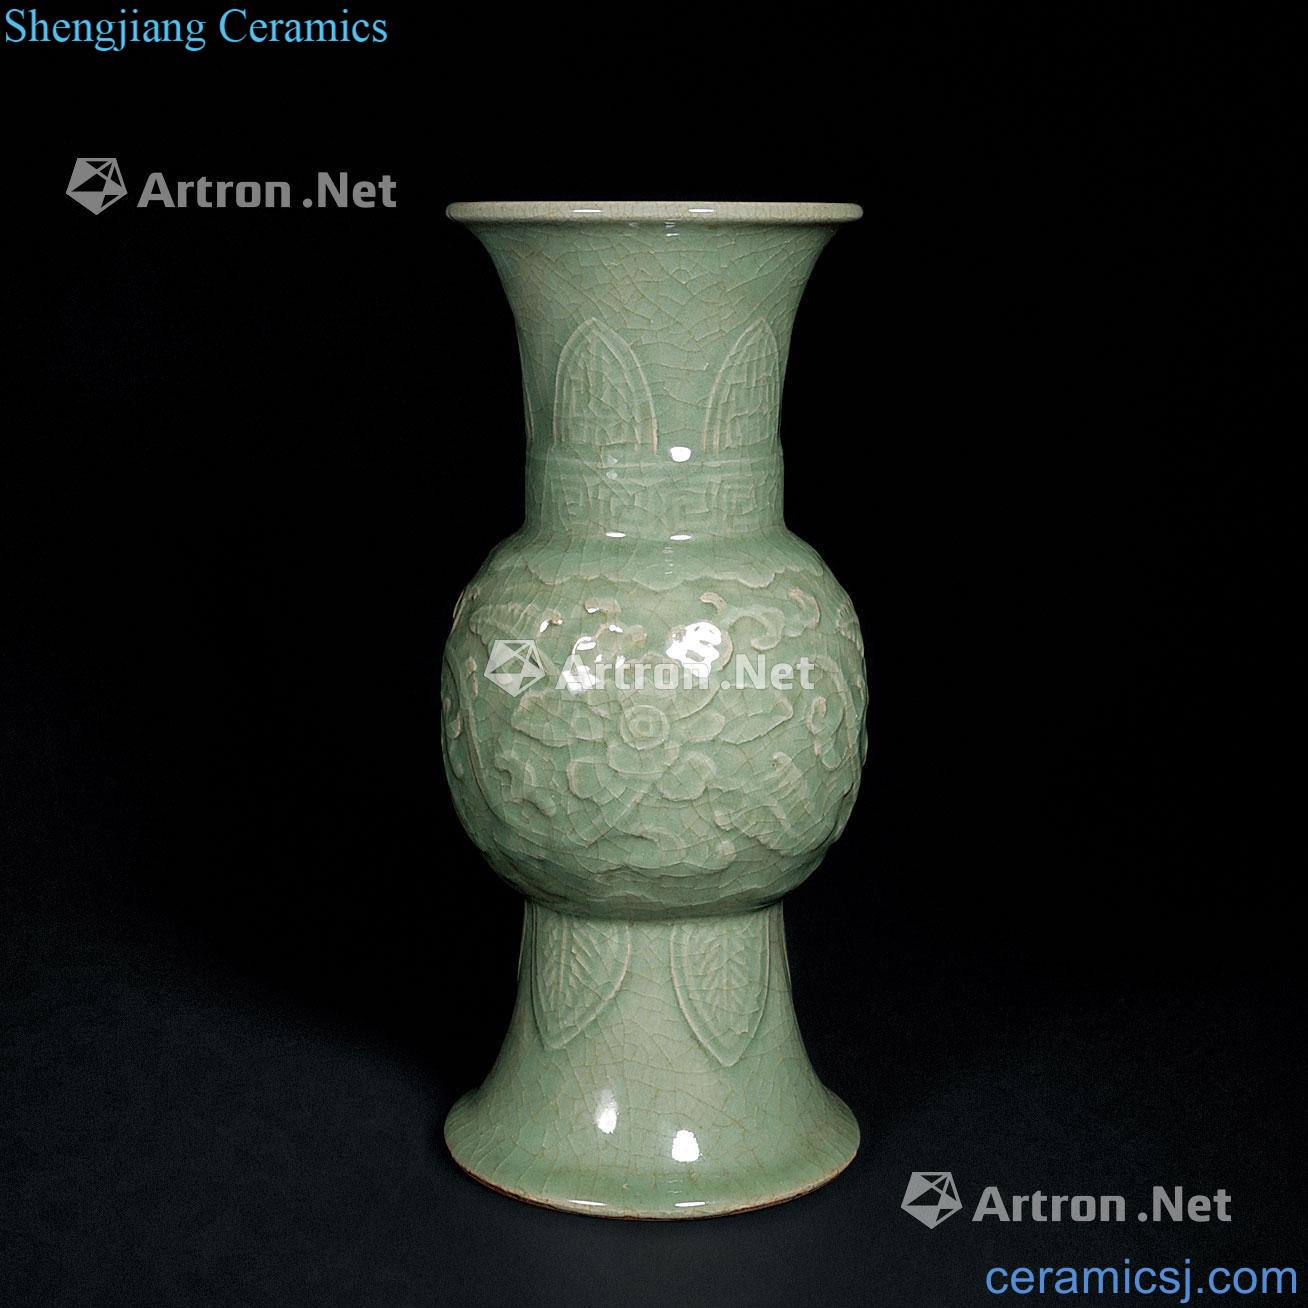 In the Ming dynasty Longquan celadon vase